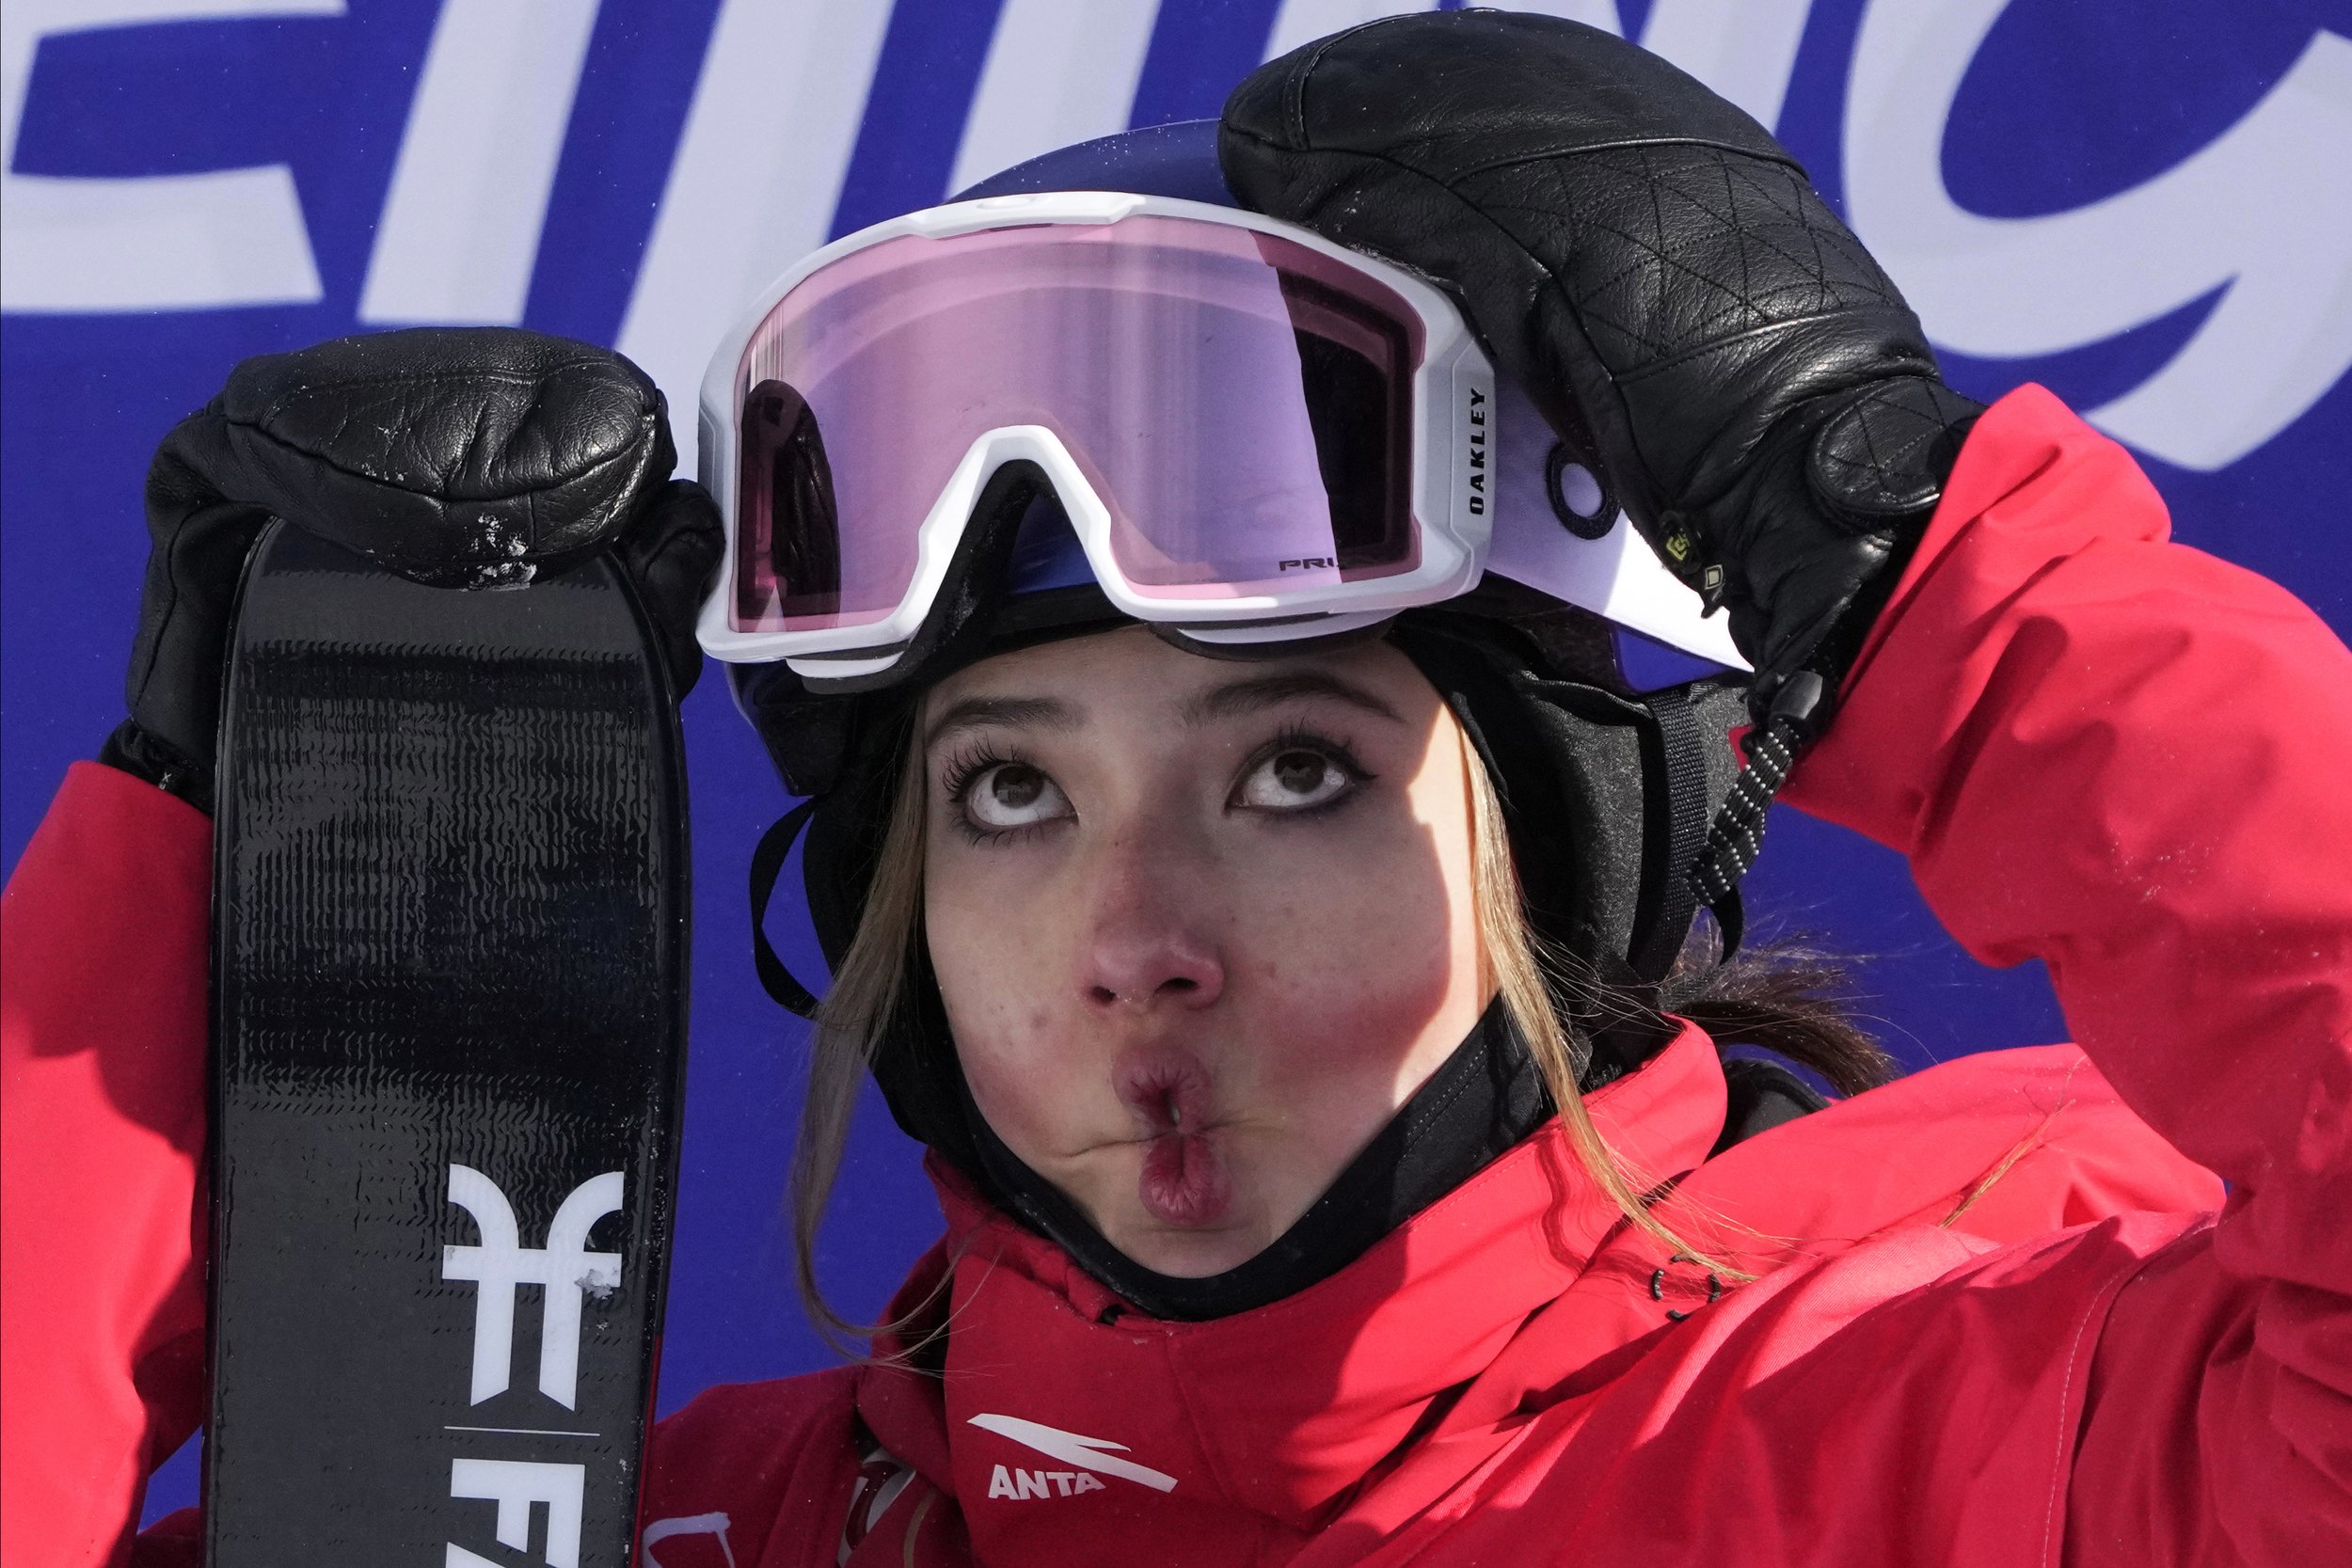  China's Eileen Gu reacts as she competes during the women's slopestyle finals at the 2022 Winter Olympics, Tuesday, Feb. 15, 2022, in Zhangjiakou, China. (AP Photo/Lee Jin-man) 